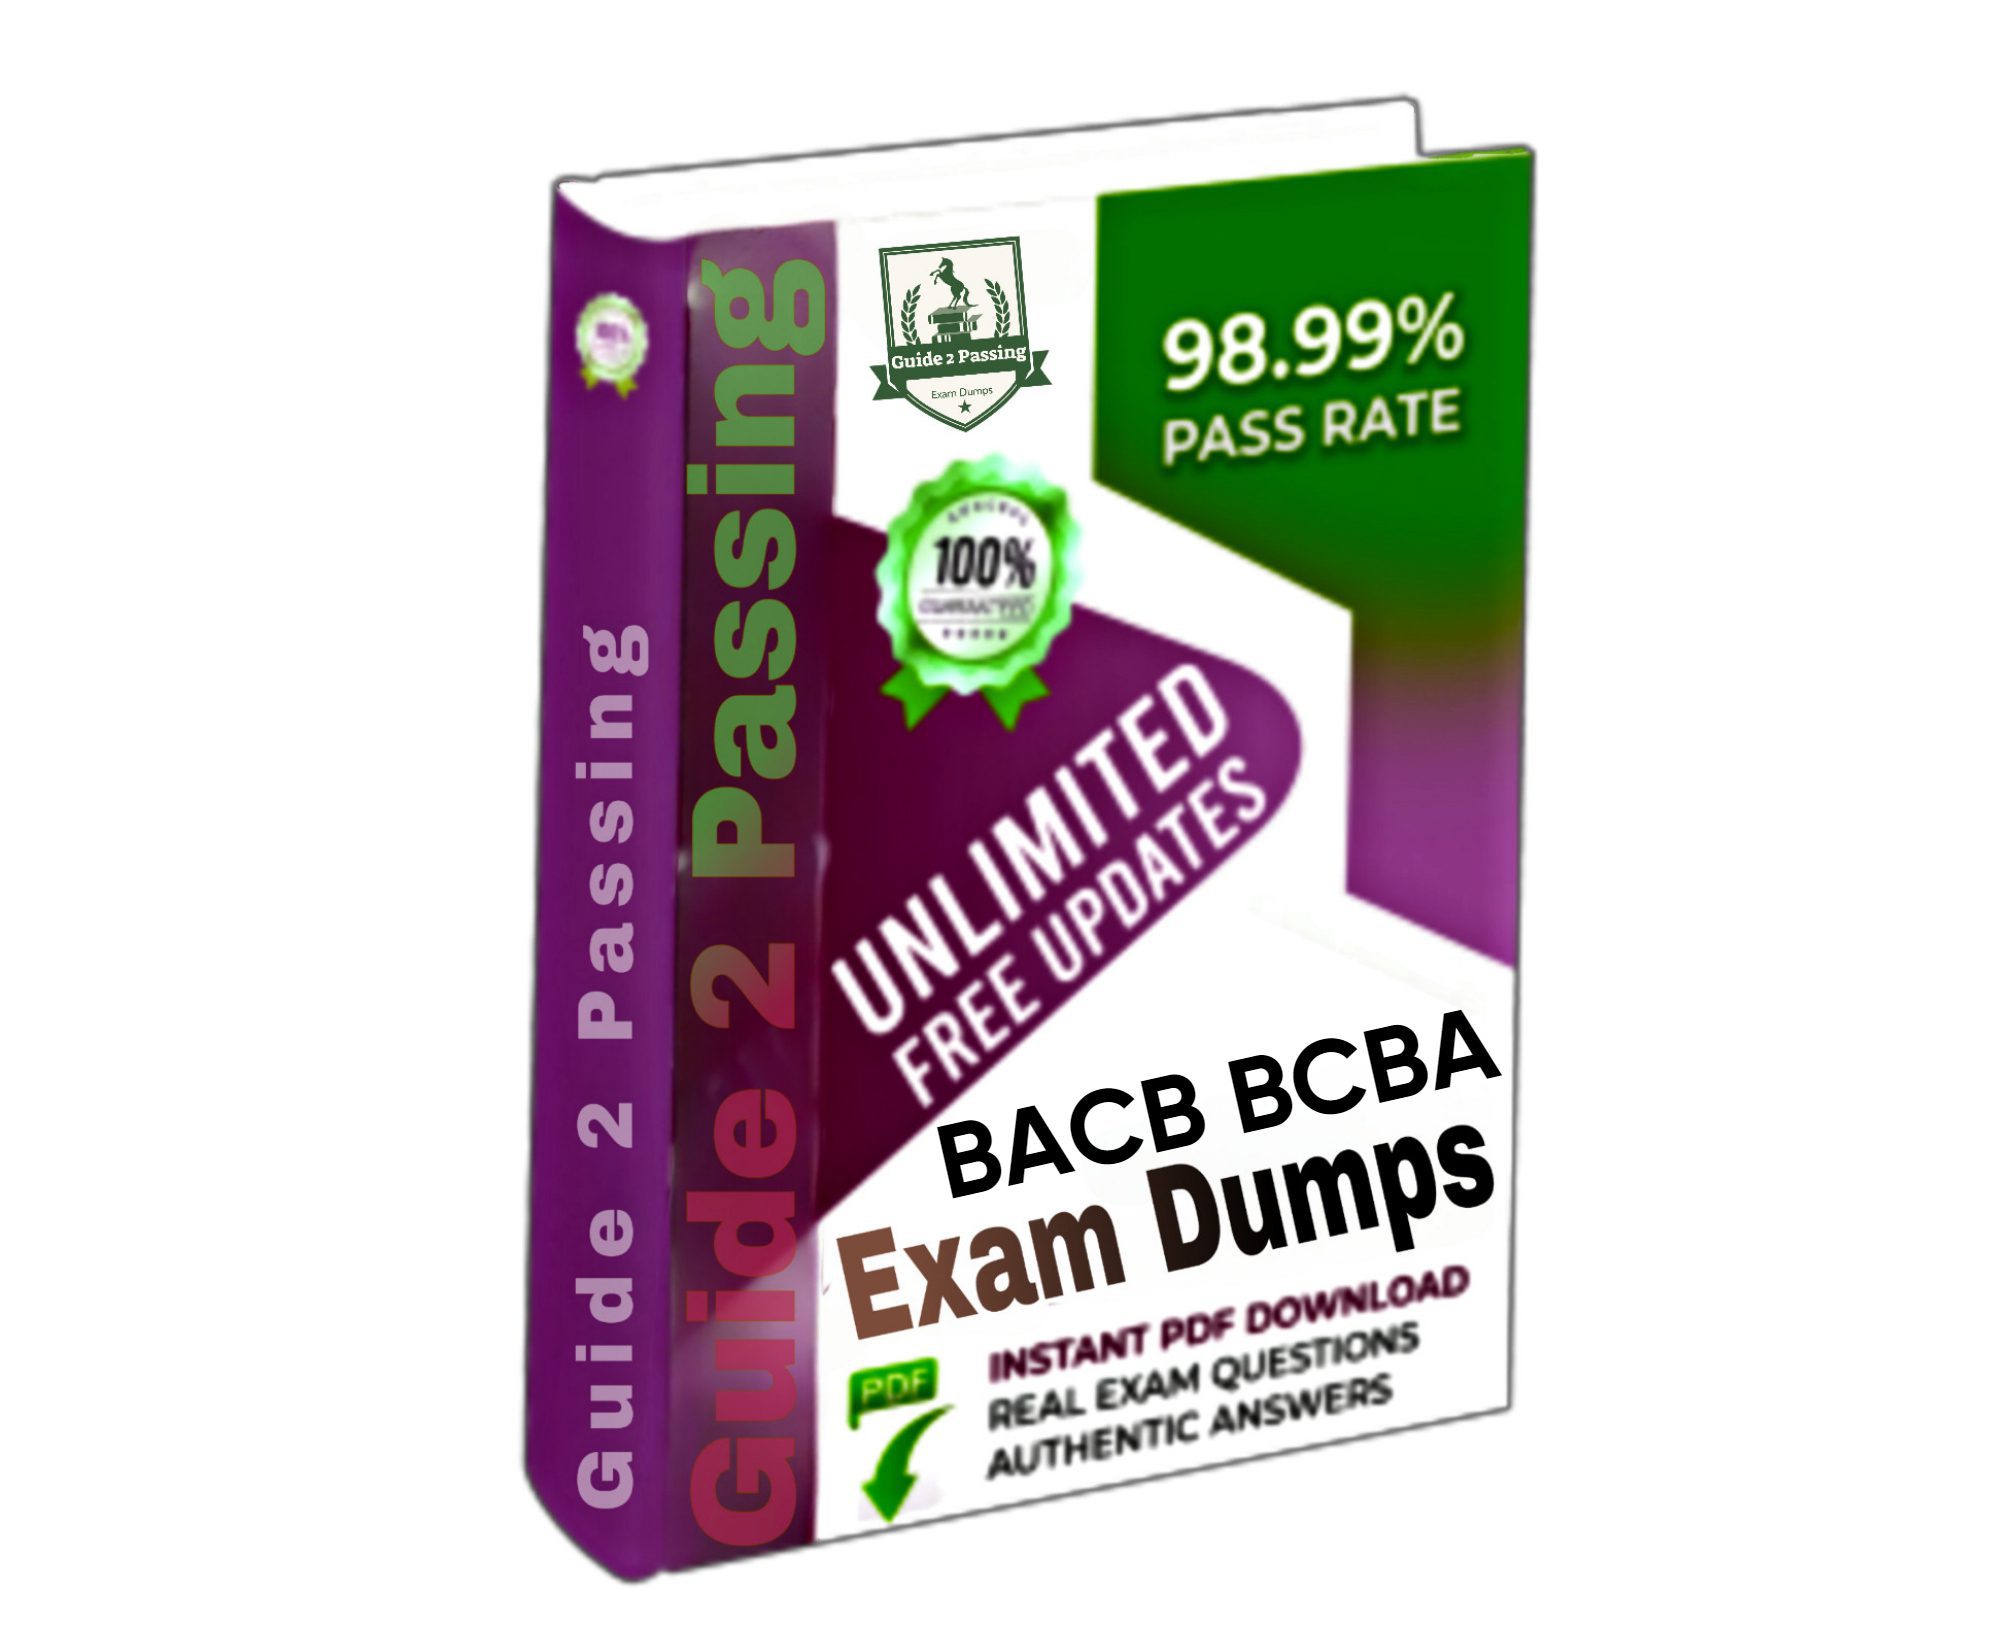 Pass Your BACB BCBA Exam Dumps From Guide 2 Passing